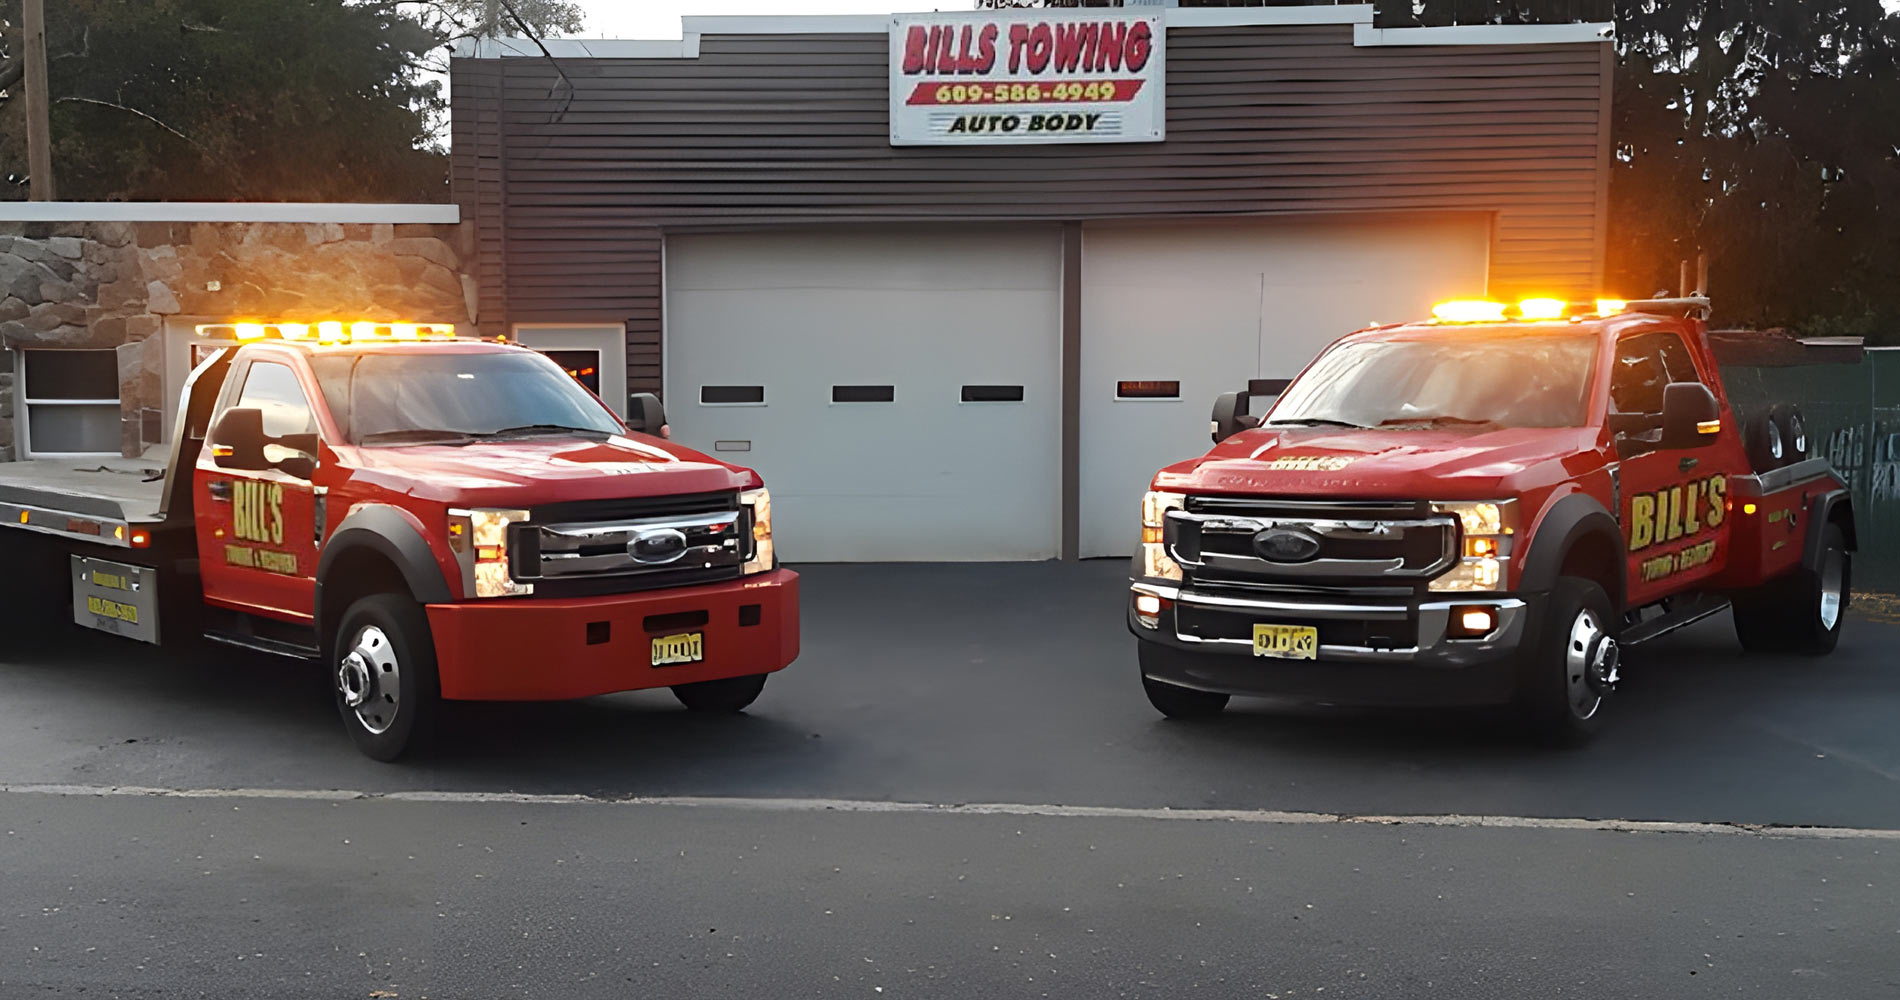 Bill's Towing | Florence, NJ 08518